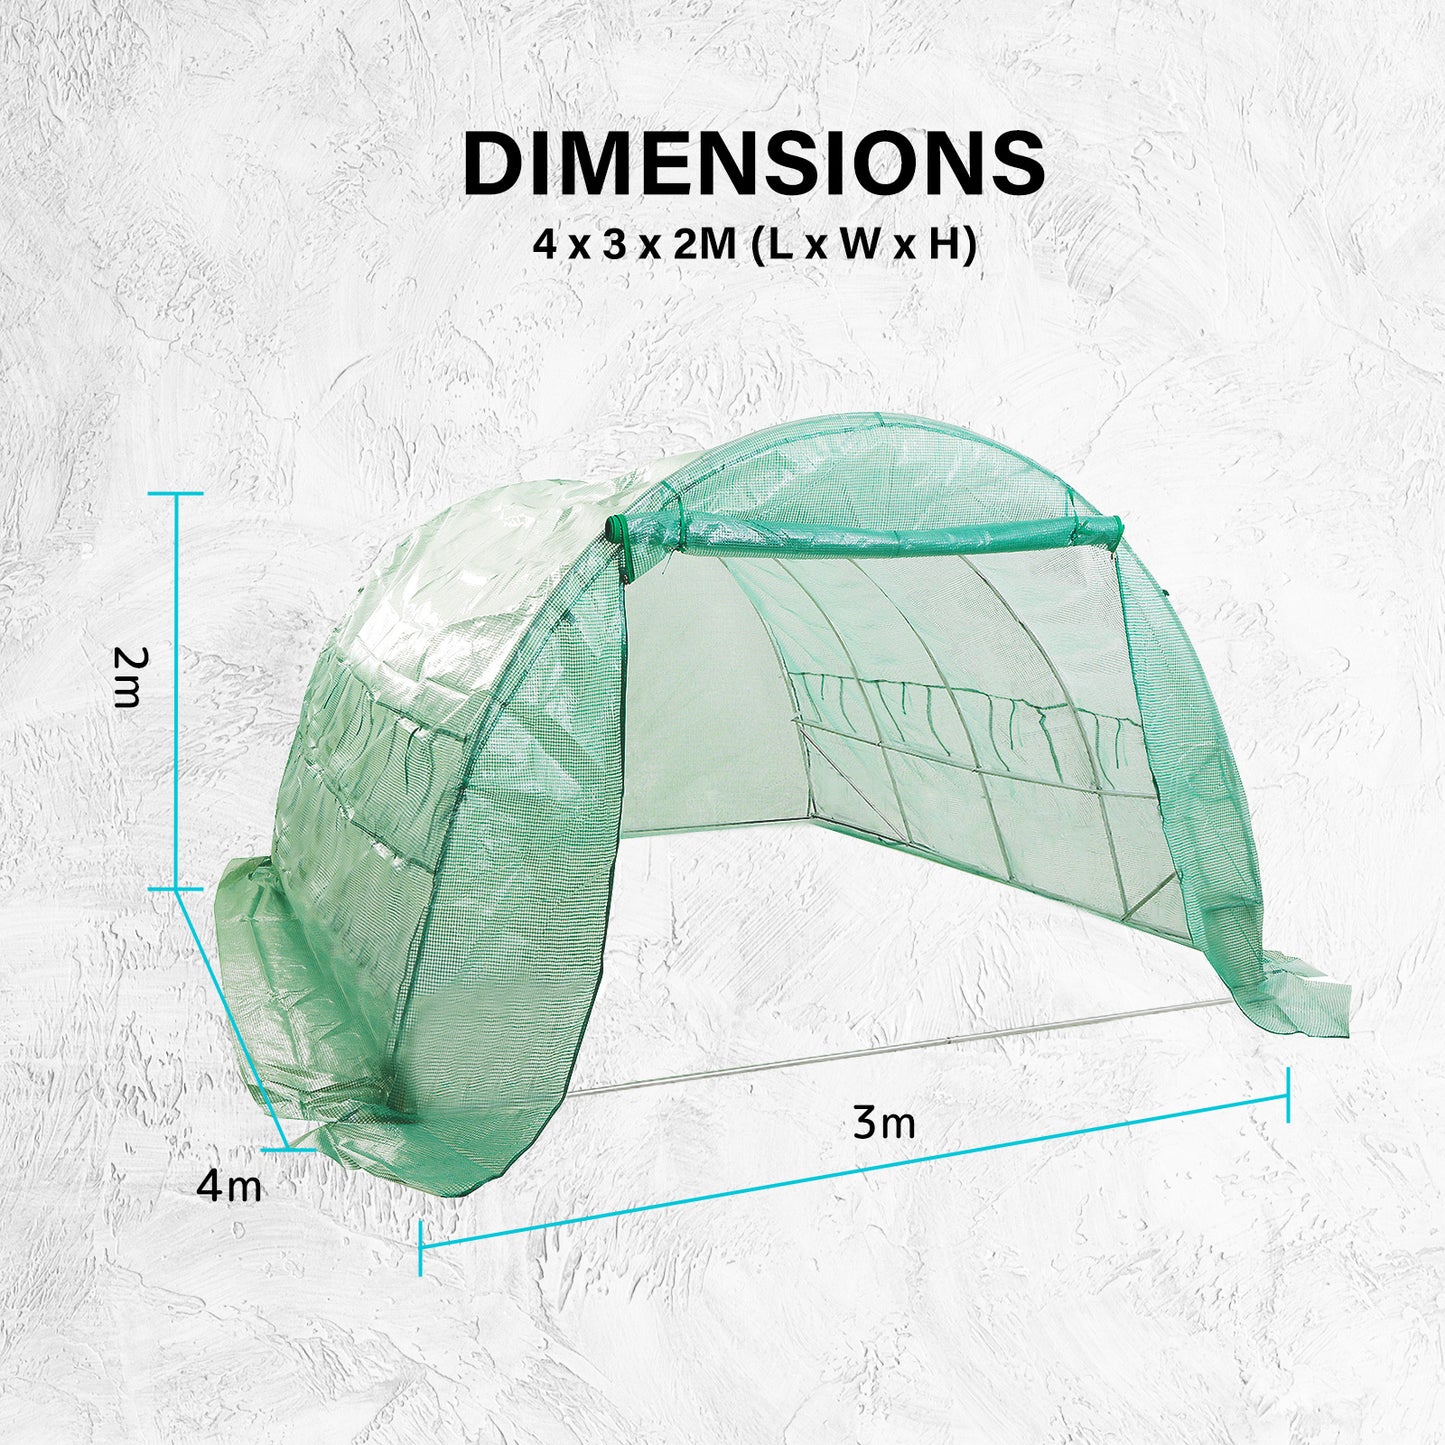 Home Ready Dome Hoop Tunnel Polytunnel 4x3x2M Garden Greenhouse Walk-In Shed PE - image12